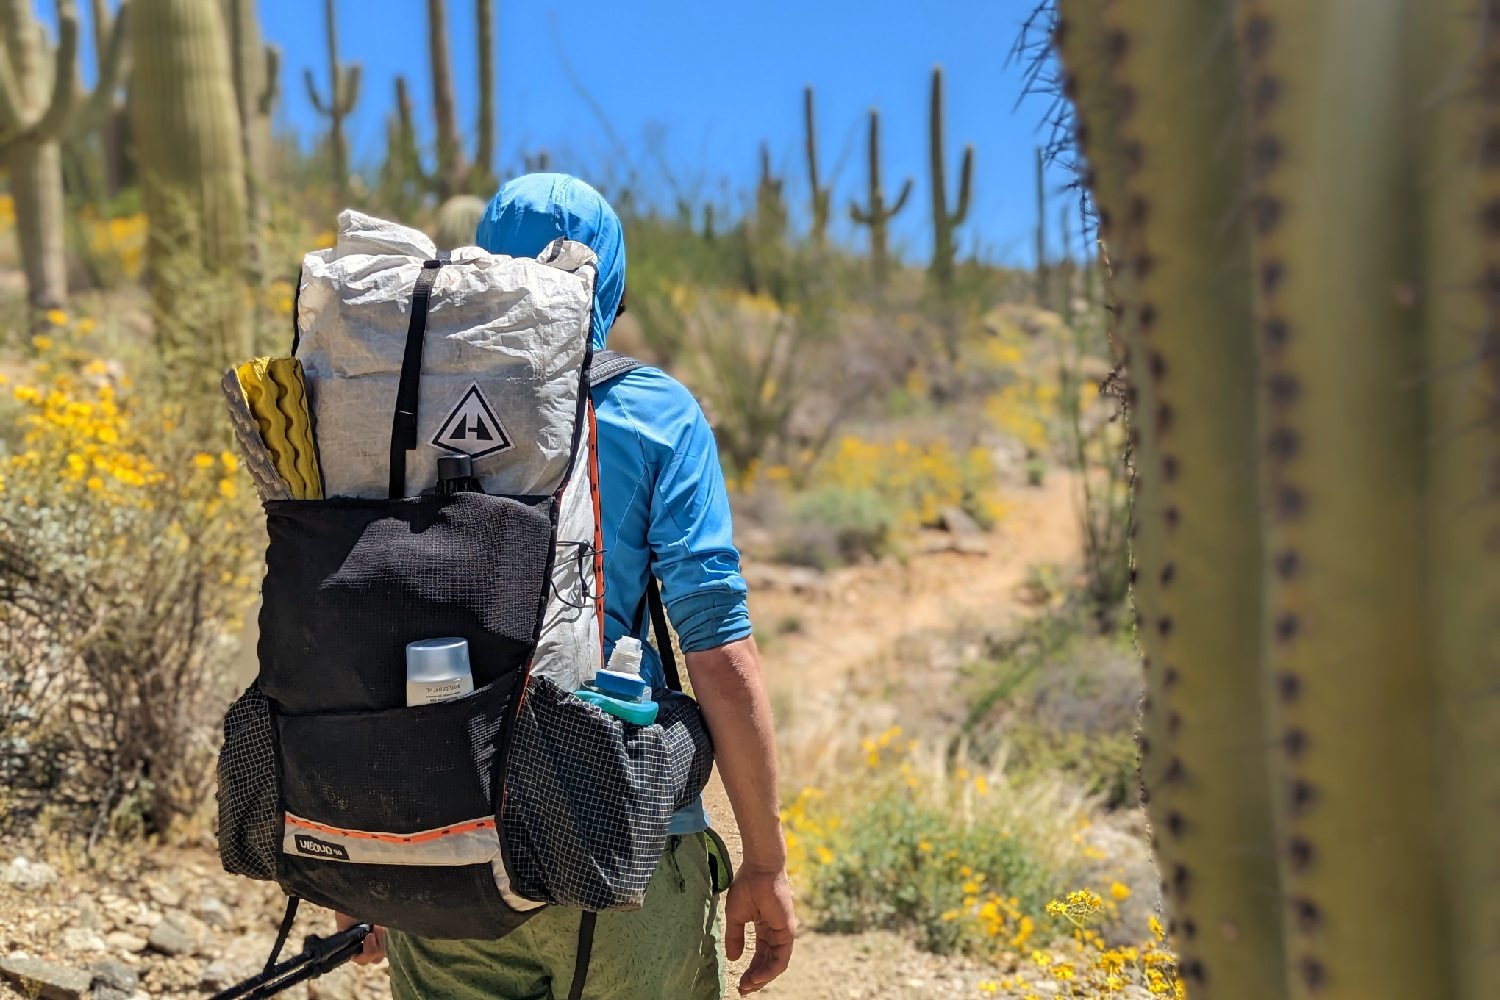 A hiker wearing the Hyperlite Mountain Gear Unbound 40 in Saguaro National Park - there is a blurred out cactus in the foreground and distant saguaros in the background